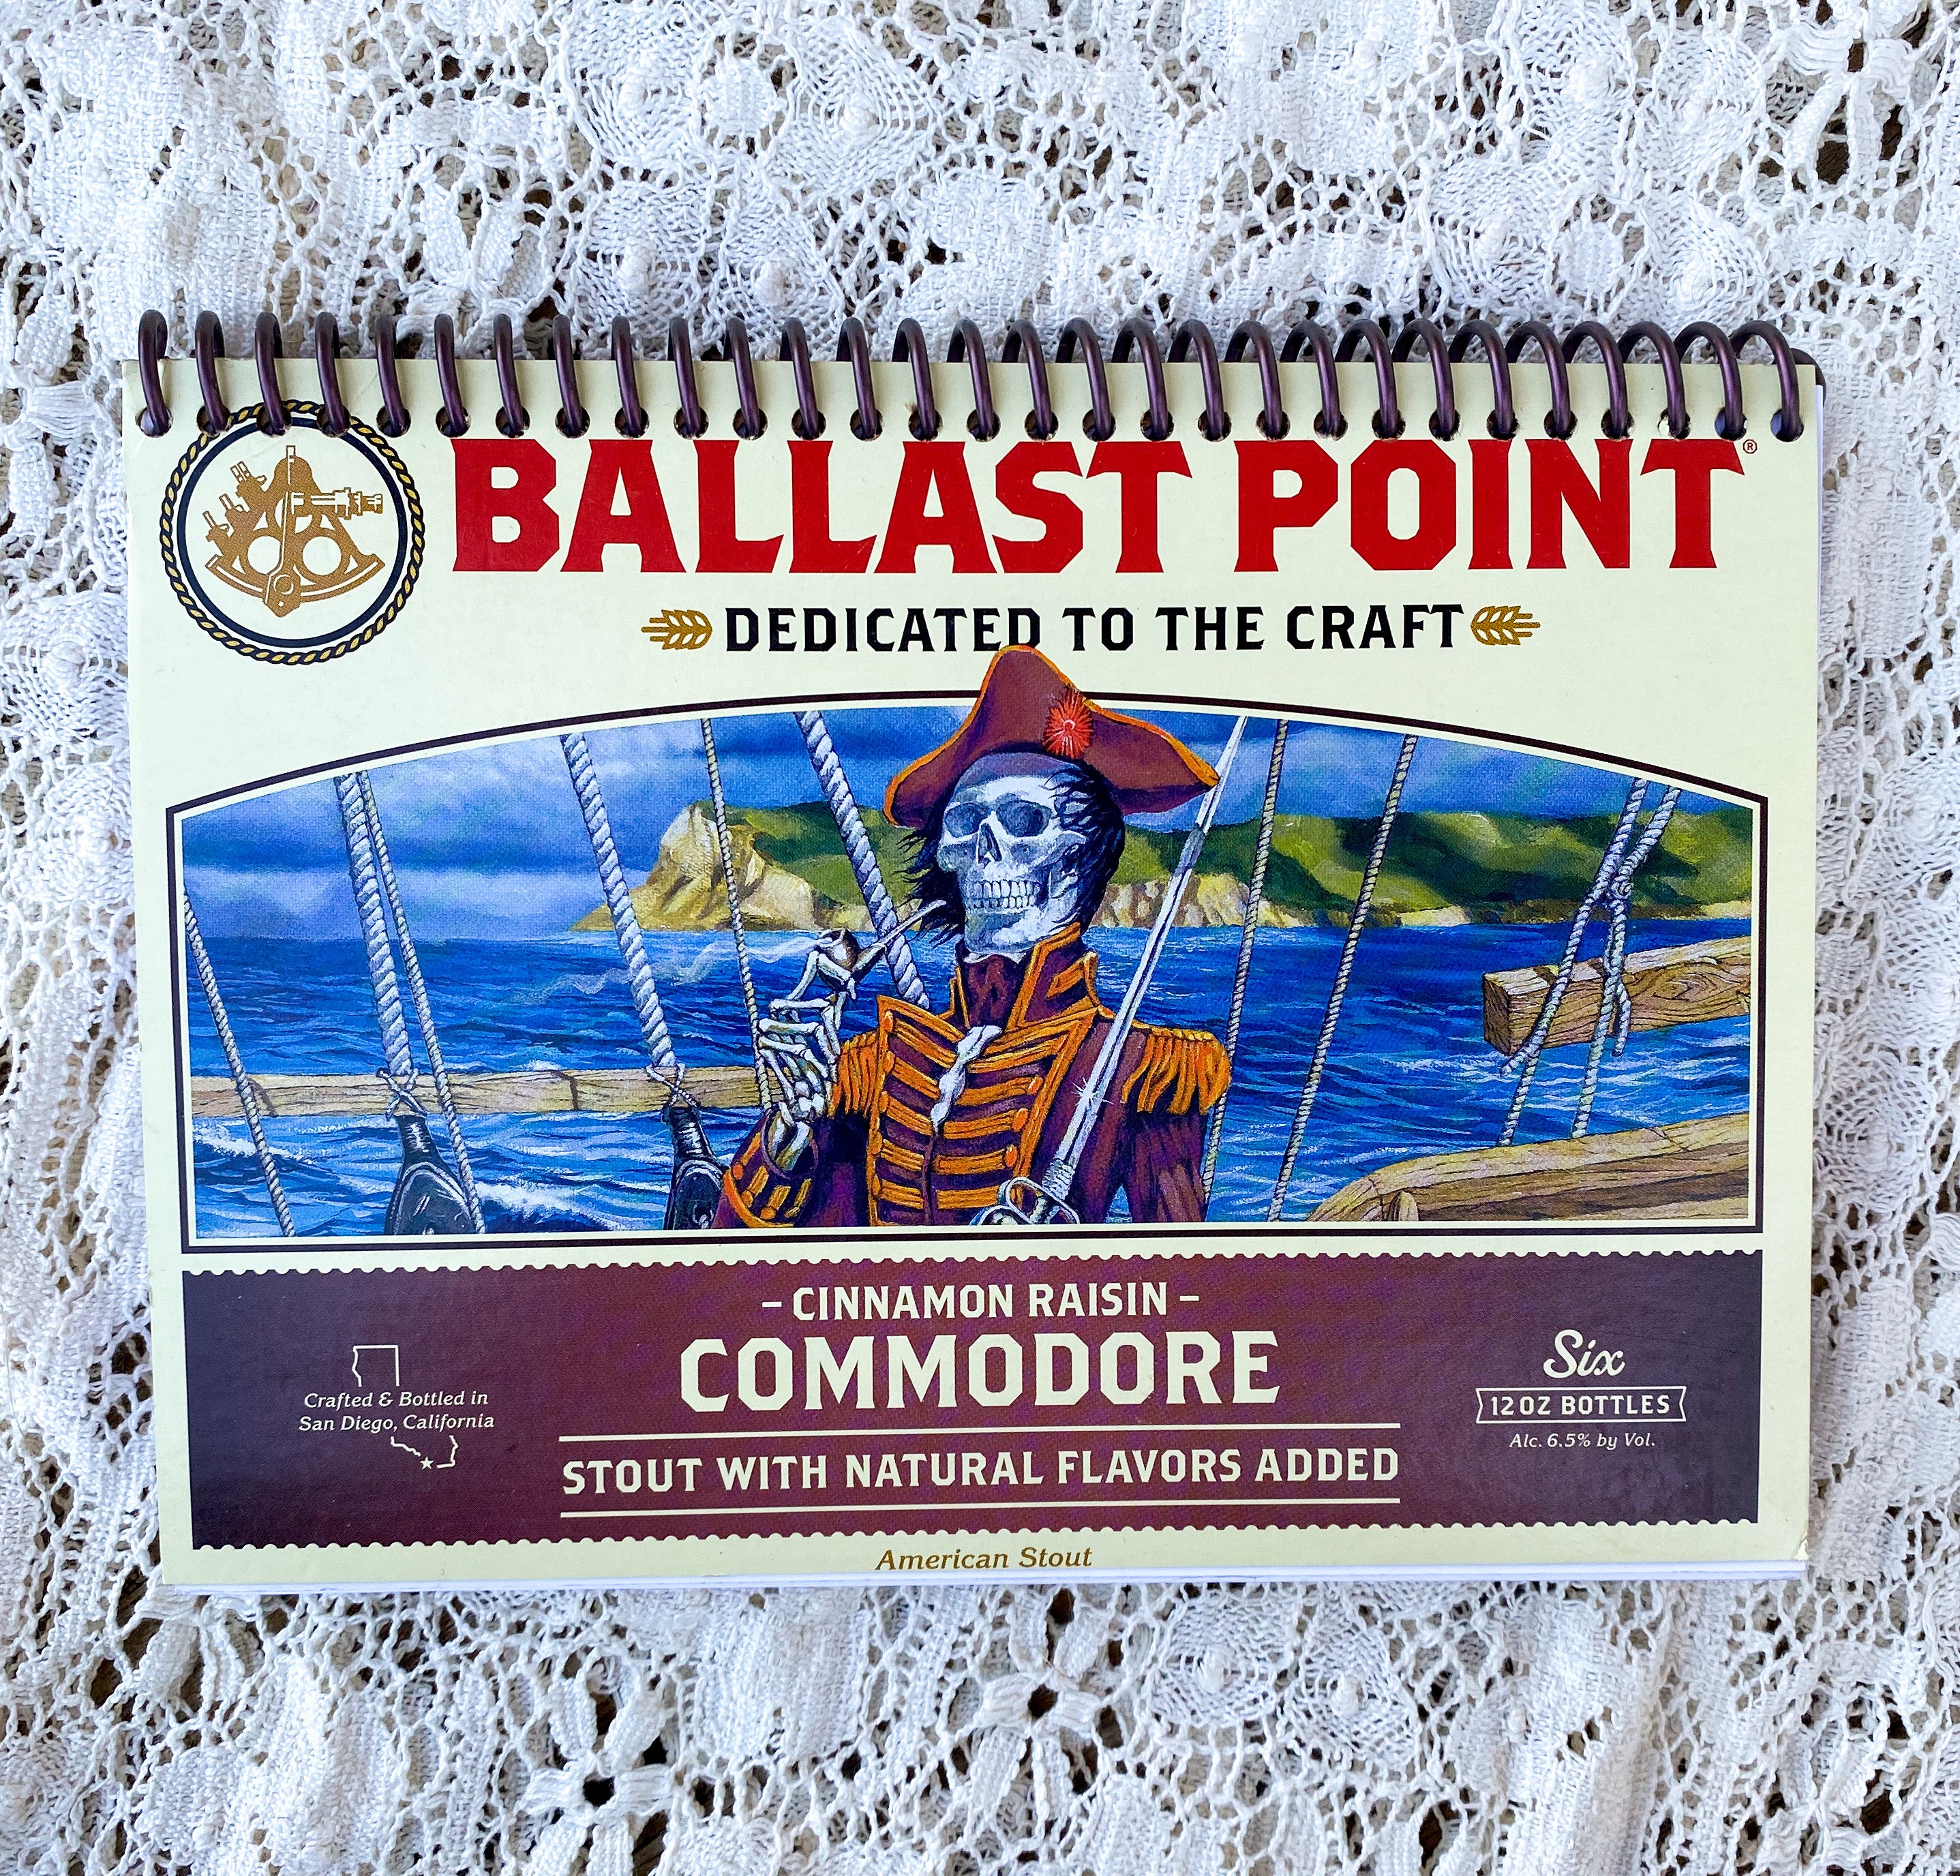 Ballast Point Recycled Beer Carton Notebook